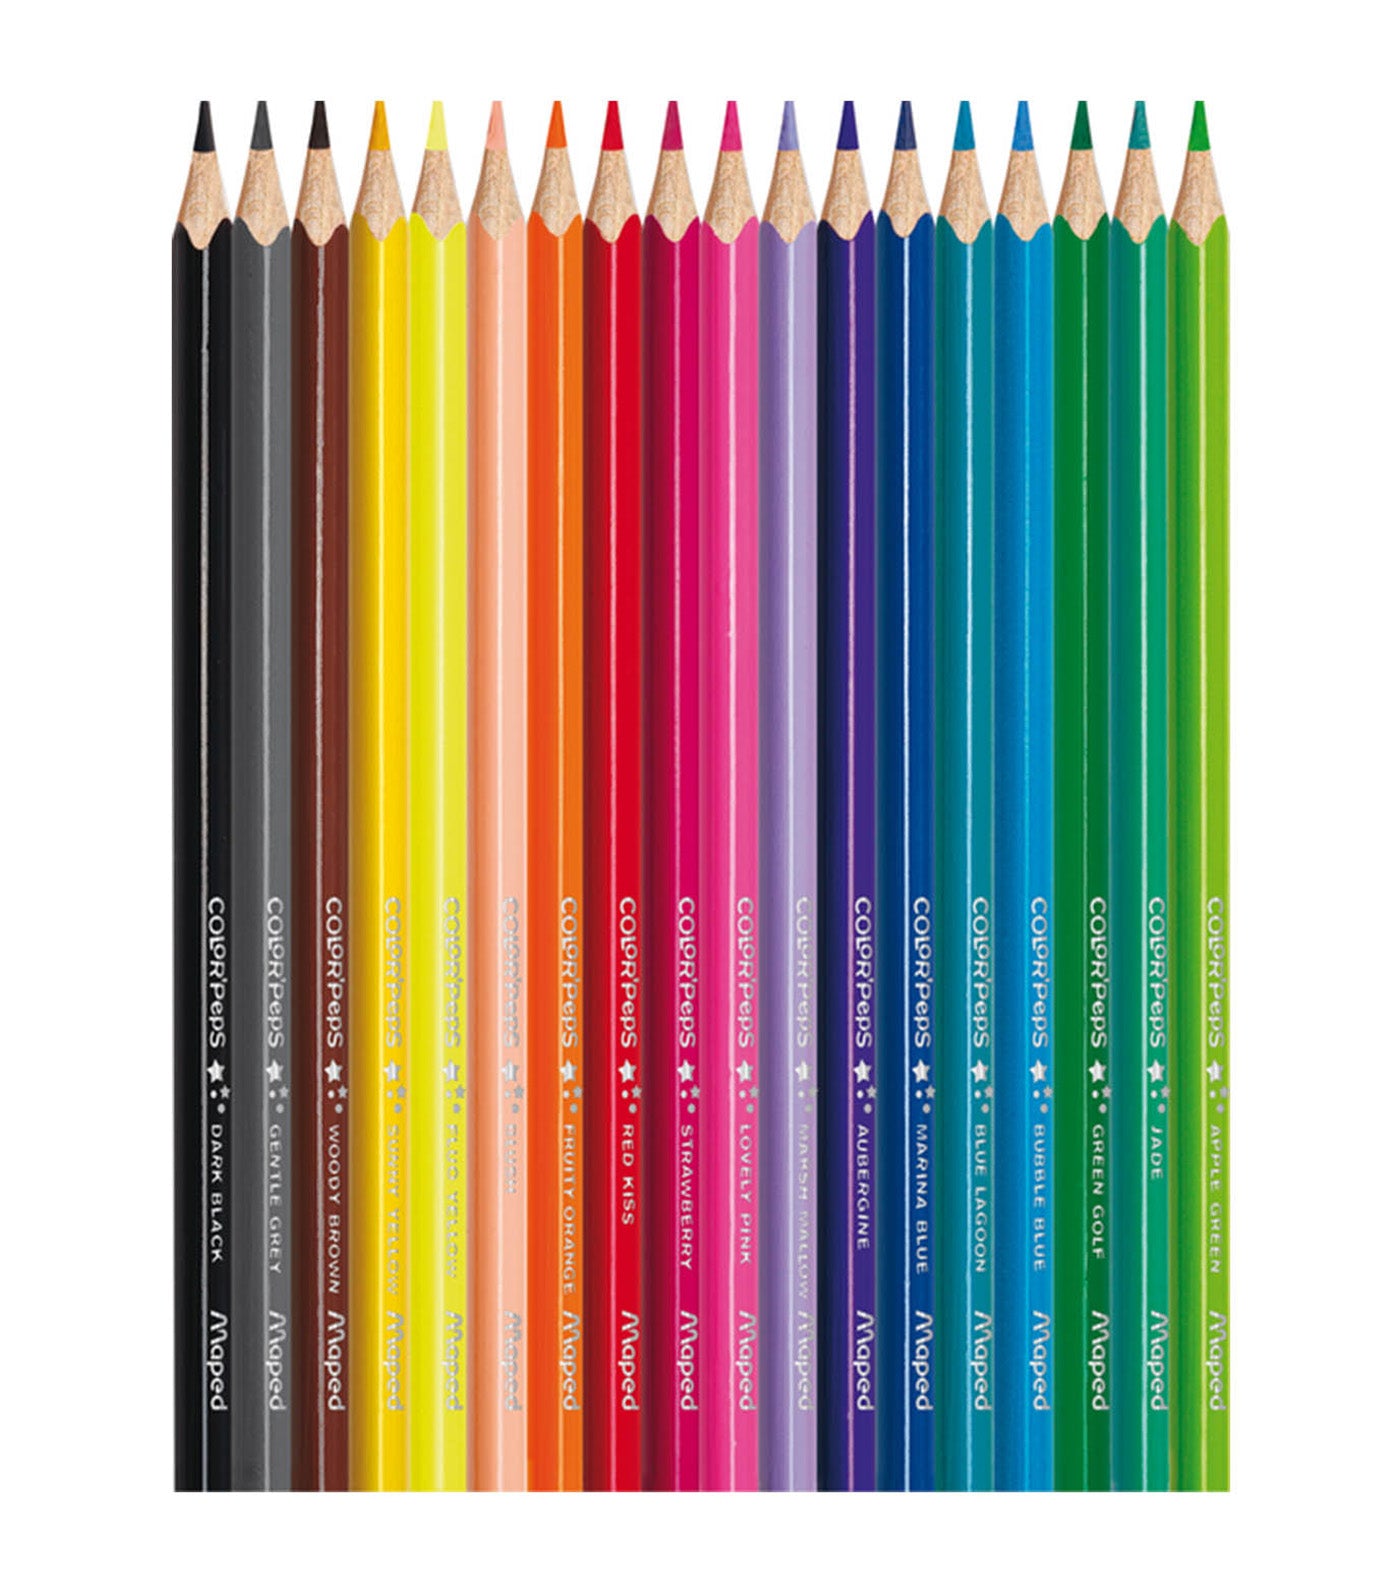 Color'Peps Star Colored Pencils x 18